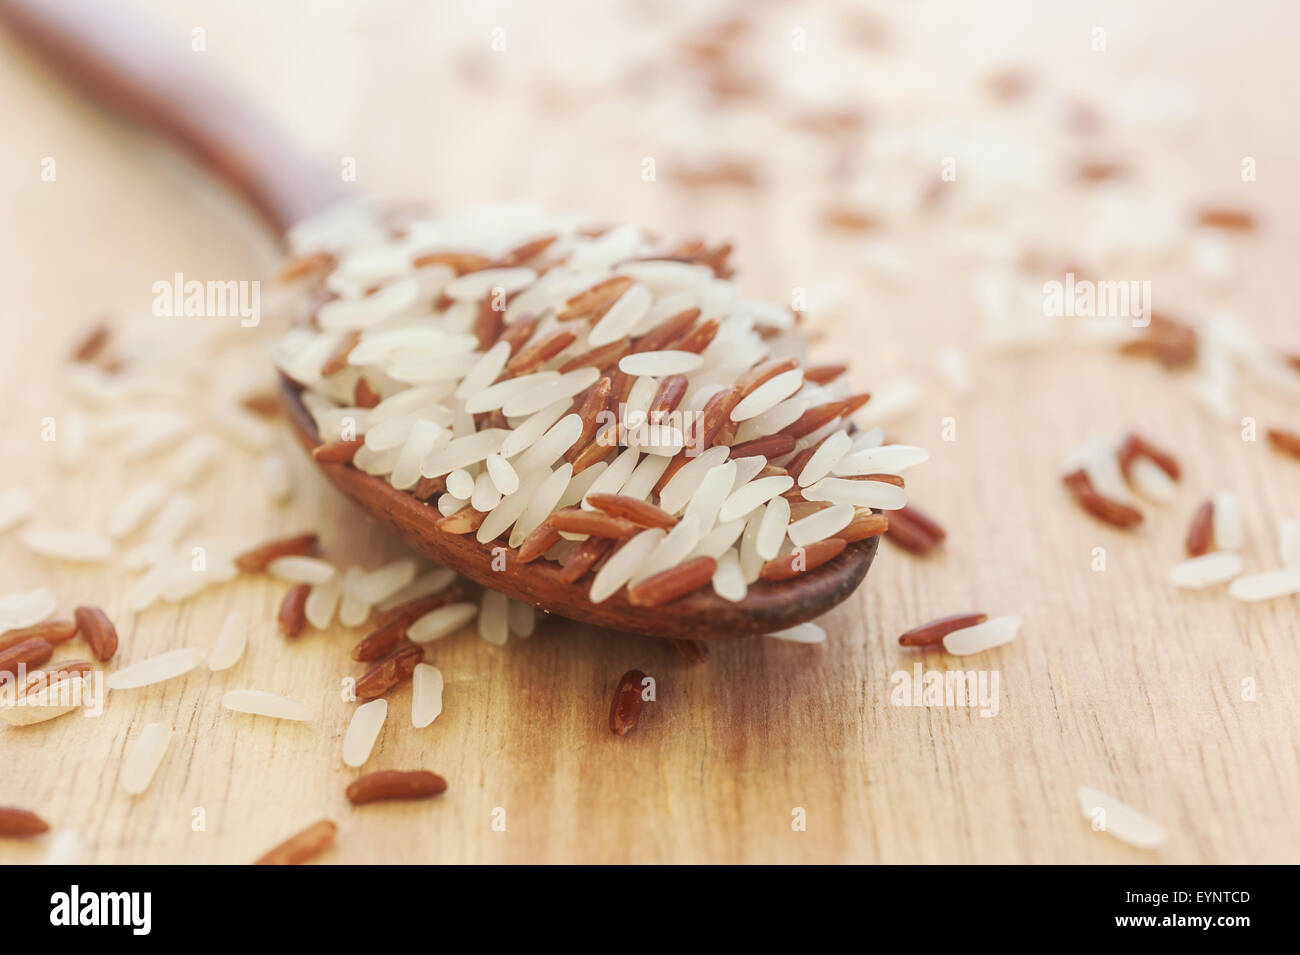 Rice berry, Brown rice in wooden spoon on wood, selective focus Stock Photo